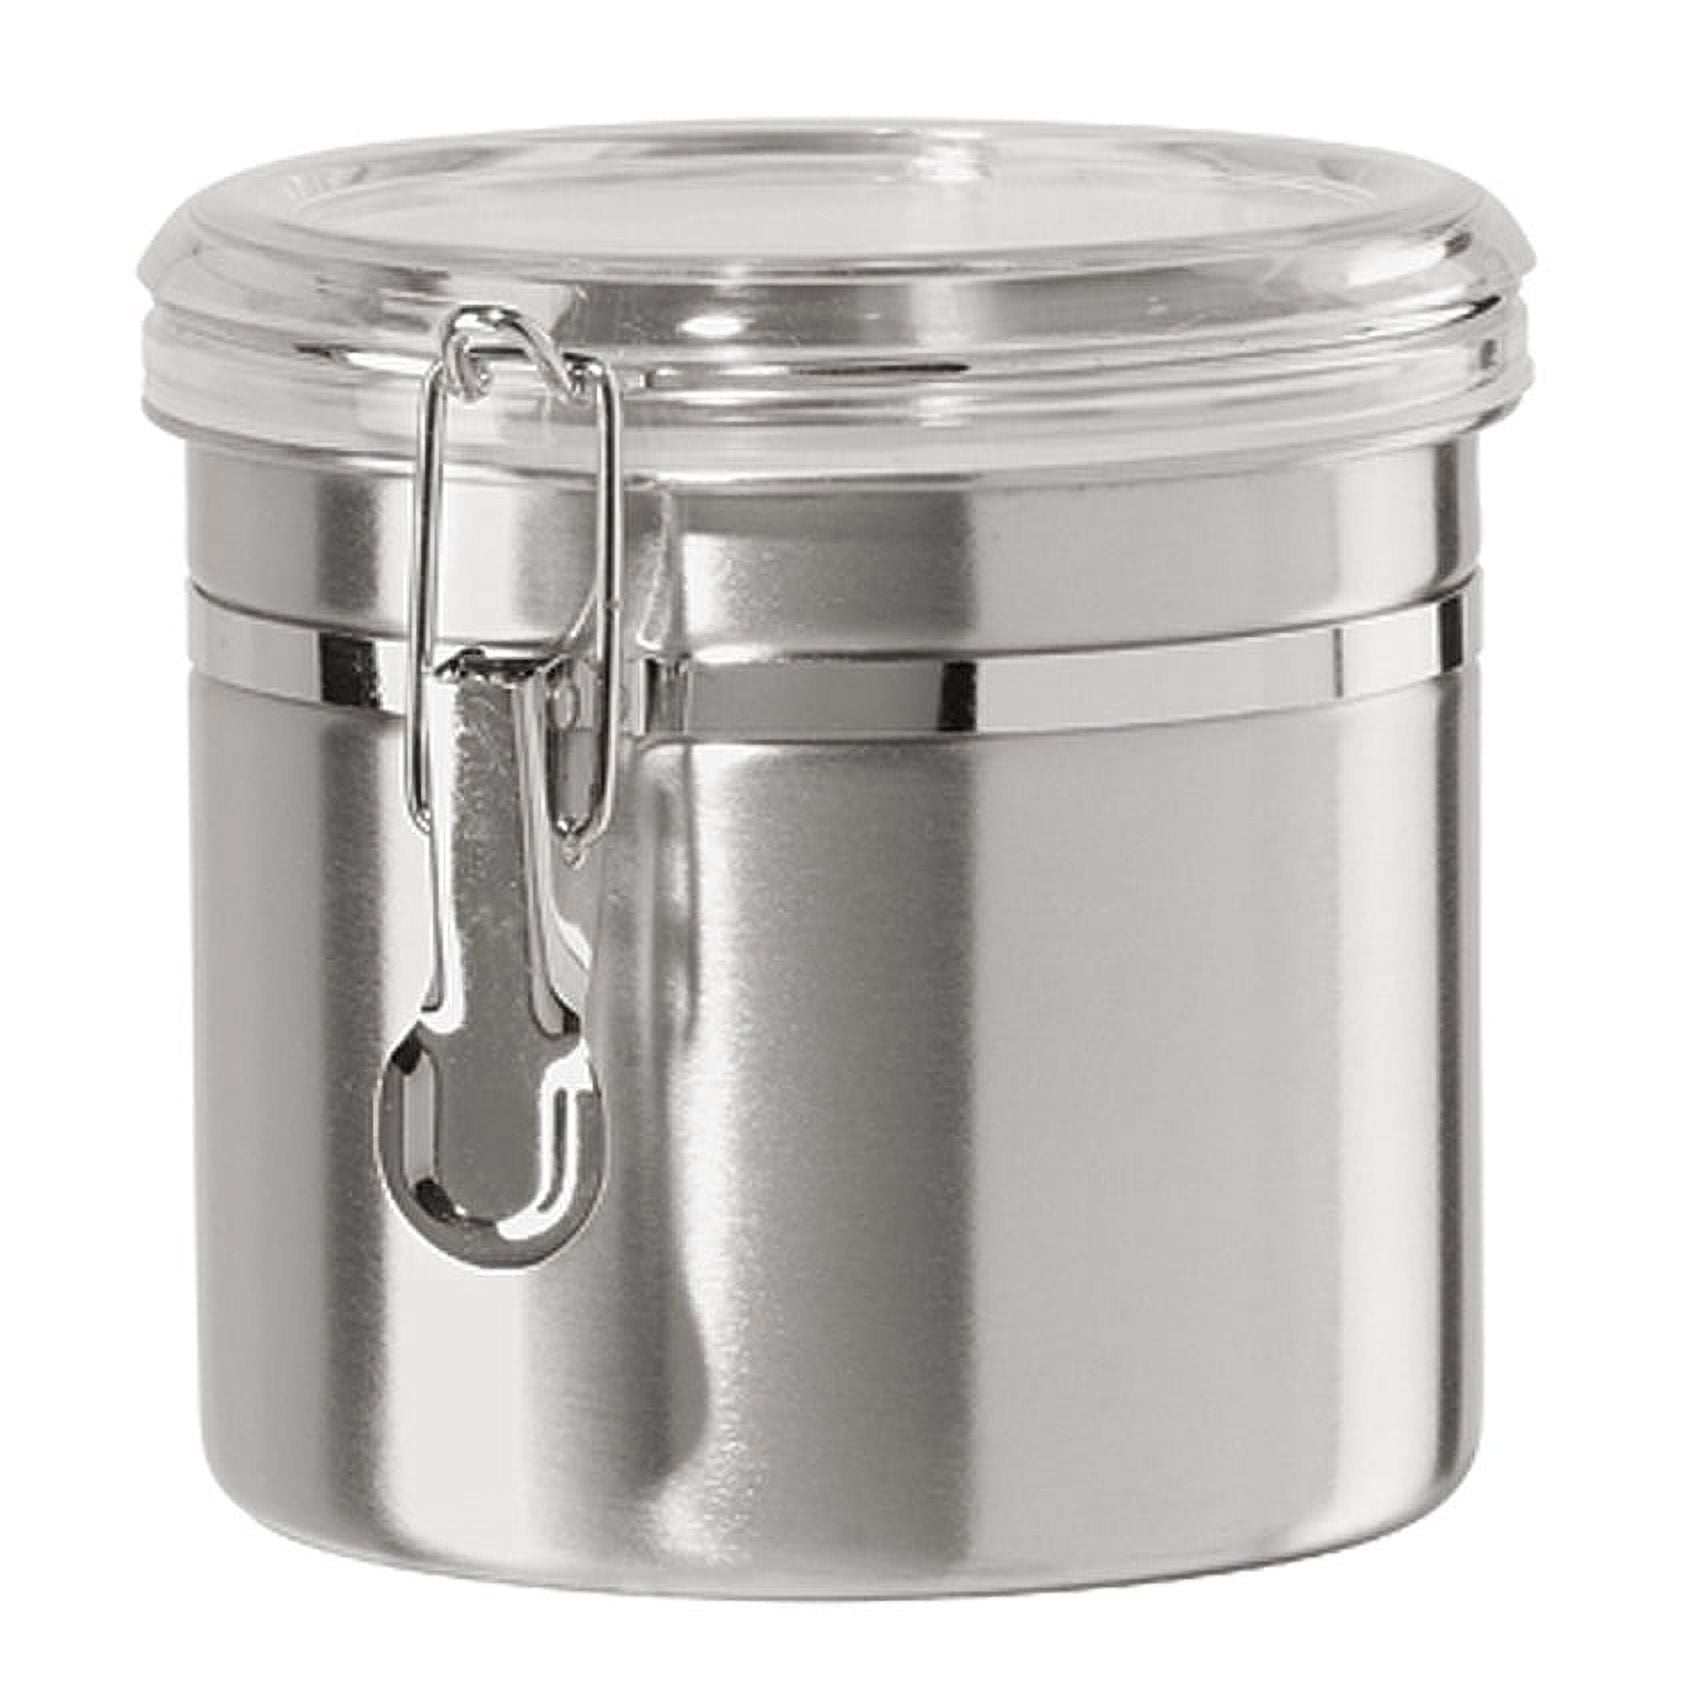 Oggi Jumbo 8 Stainless Steel Cookies Clamp Canister - Airtight Food  Storage Container Ideal for Kitchen & Pantry Storage of Cookies or other  Bulk